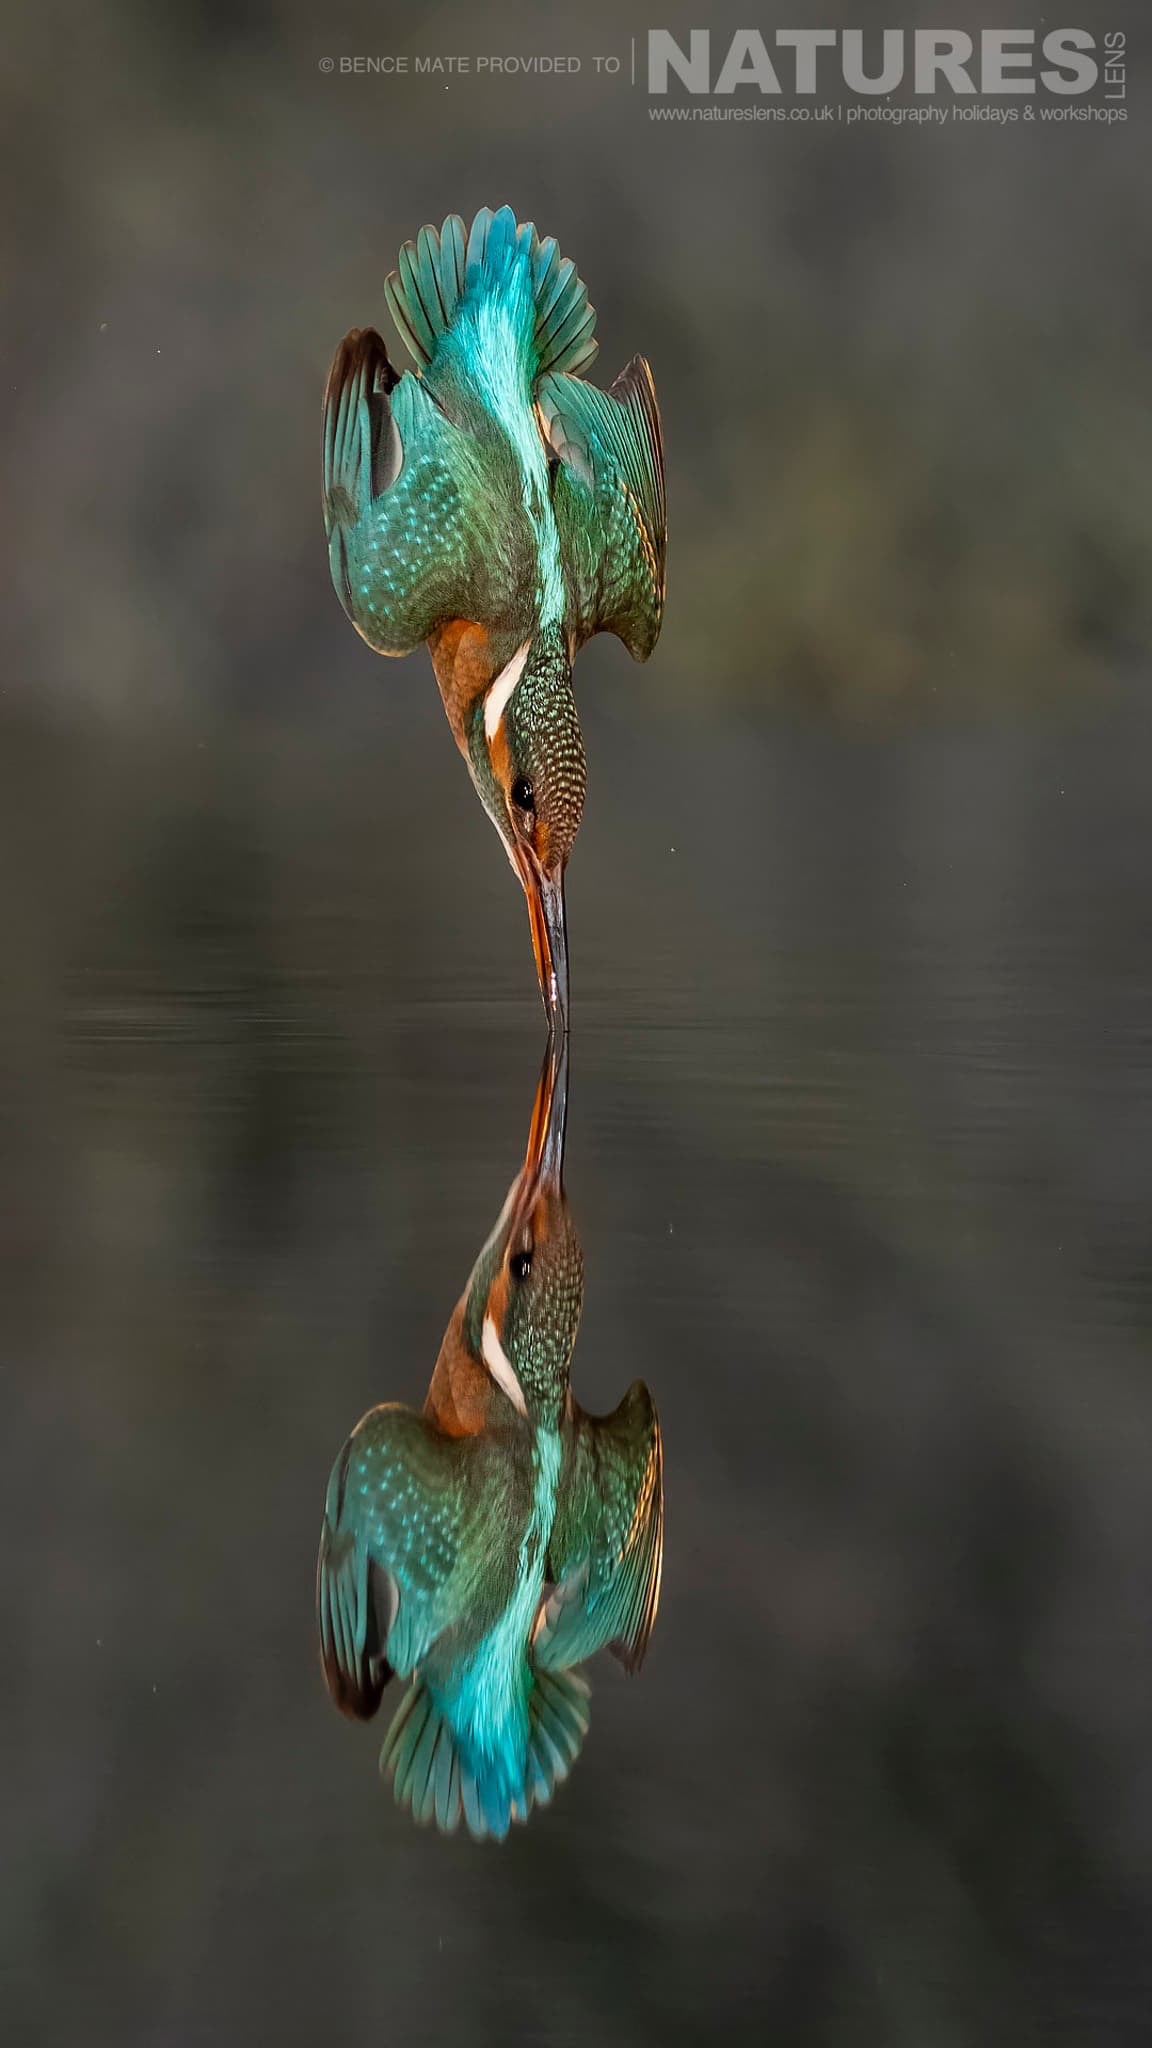 A kingfisher takes to the water at Bence Máté's Photography Hides during the Hungarian Winter